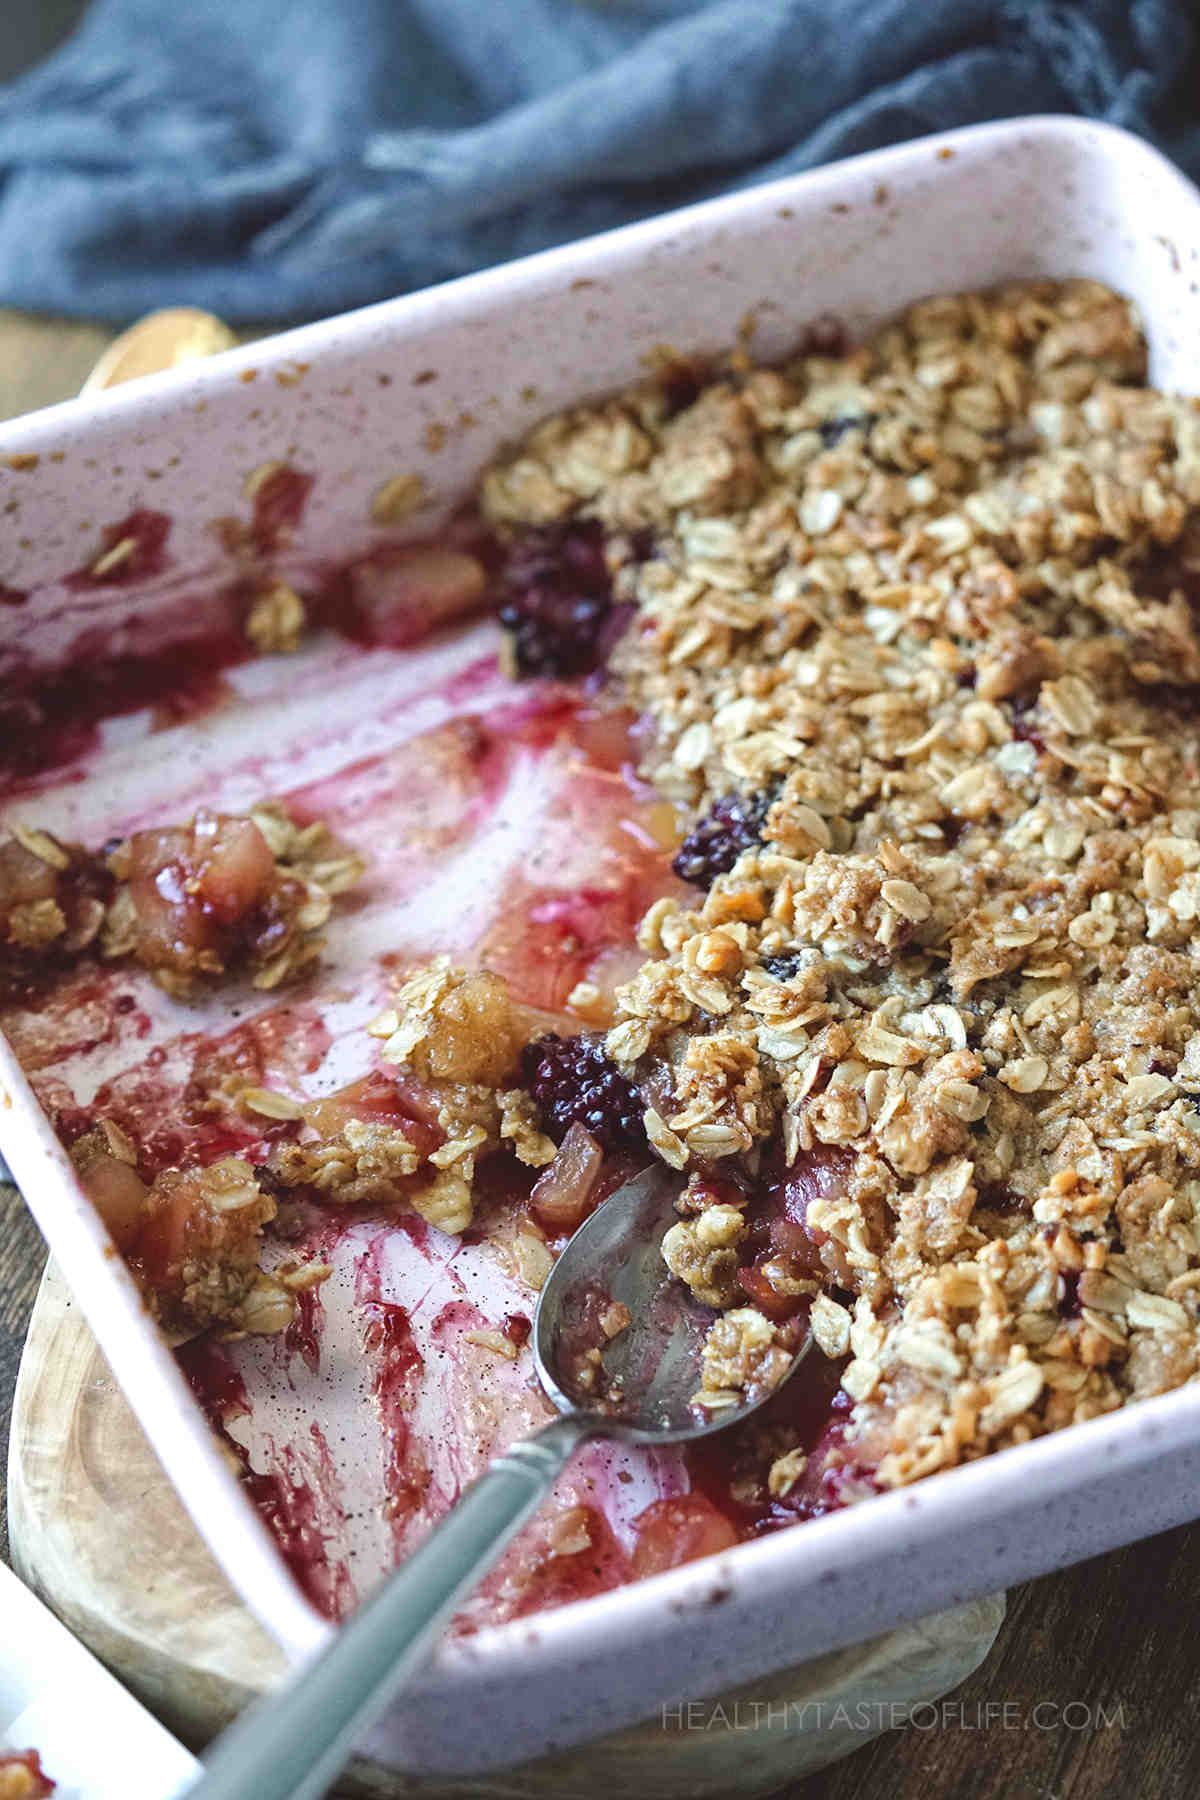 Serving the apple & blackberry crumble.